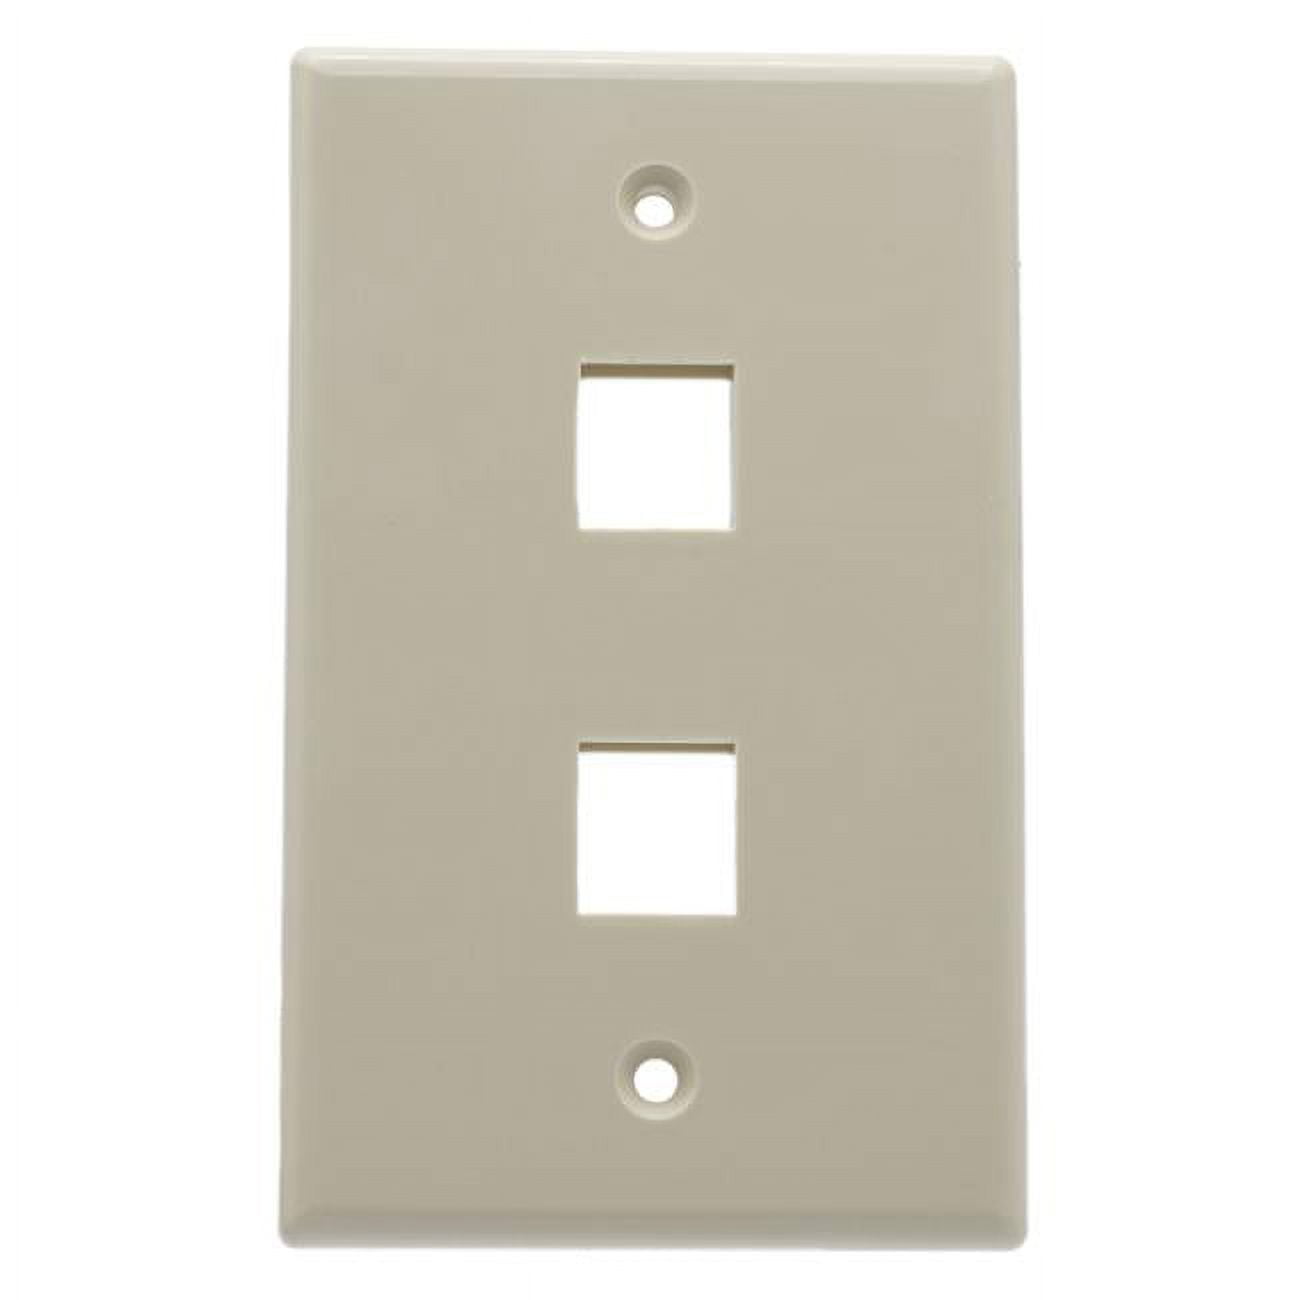 Picture of CableWholesale 3012-09304 Keystone Single Gang 4 Port Wall Plate, Lite Almond